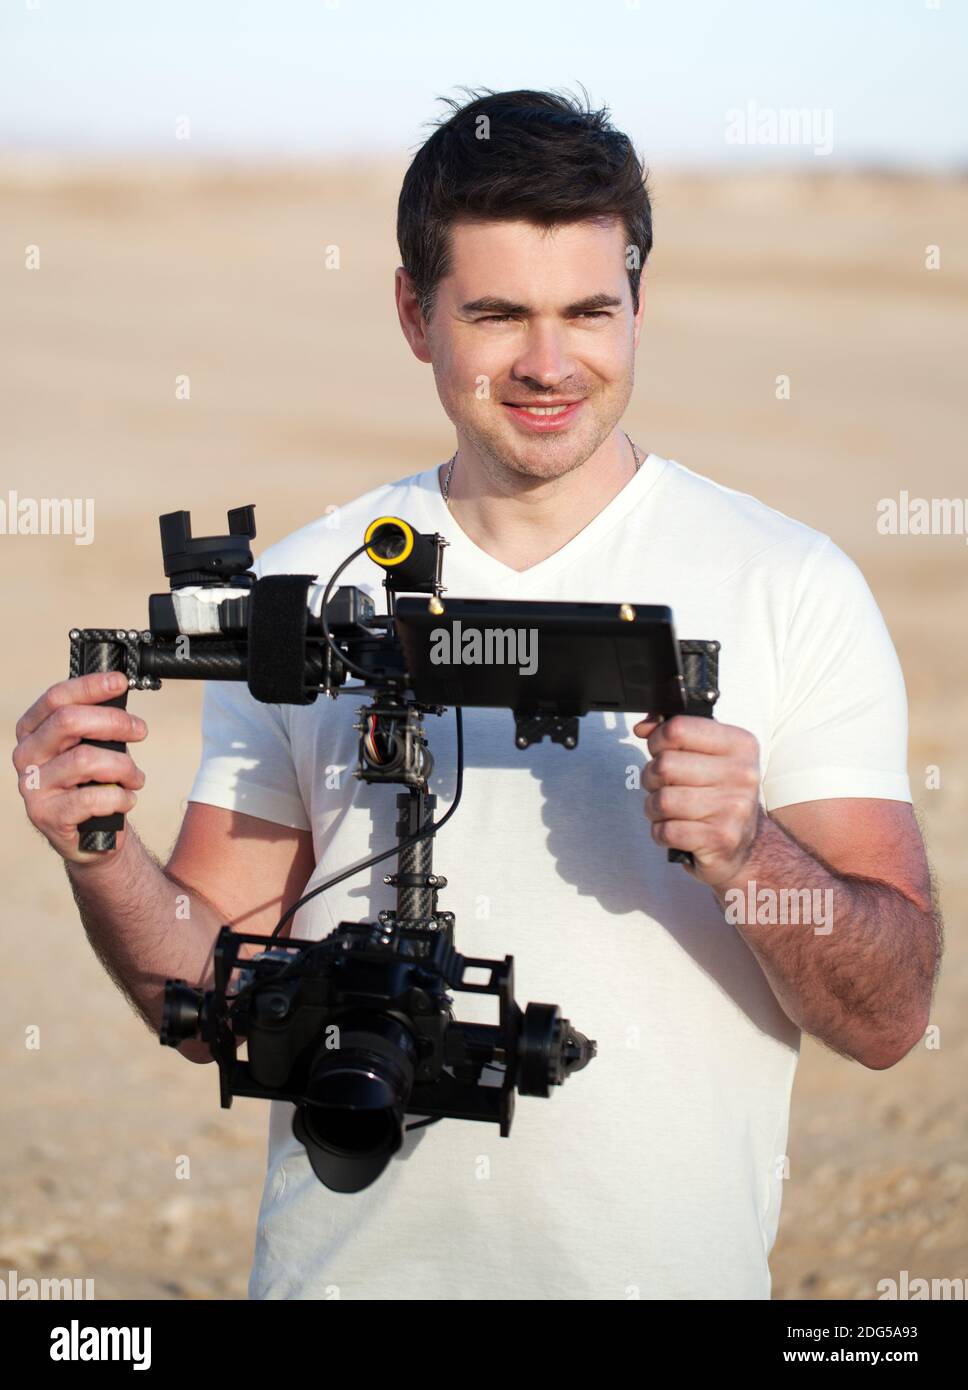 Smiling man with steadicam equipment outdoor Stock Photo